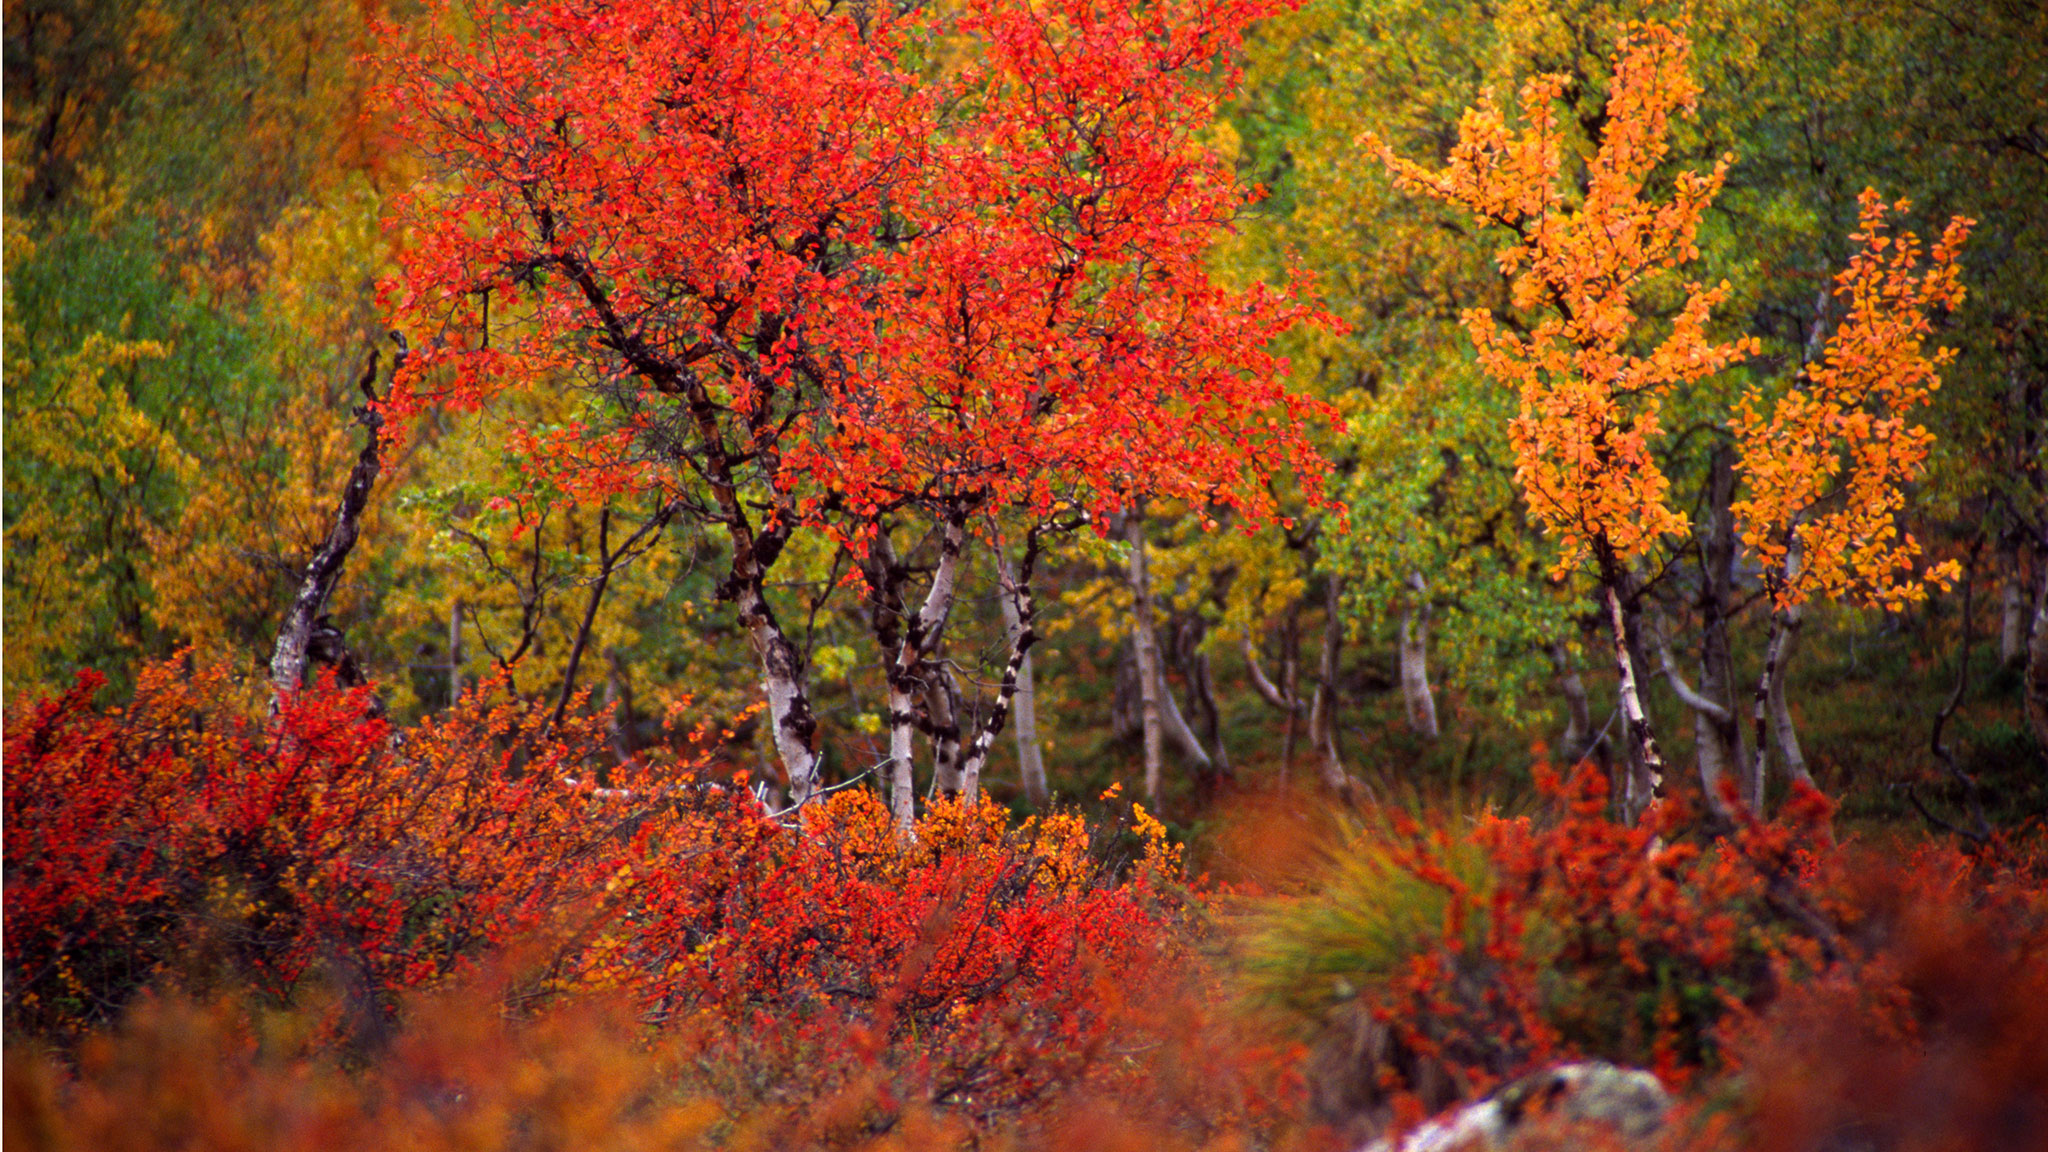 Autumn's brief glory in Finnish Lapland | Financial Times